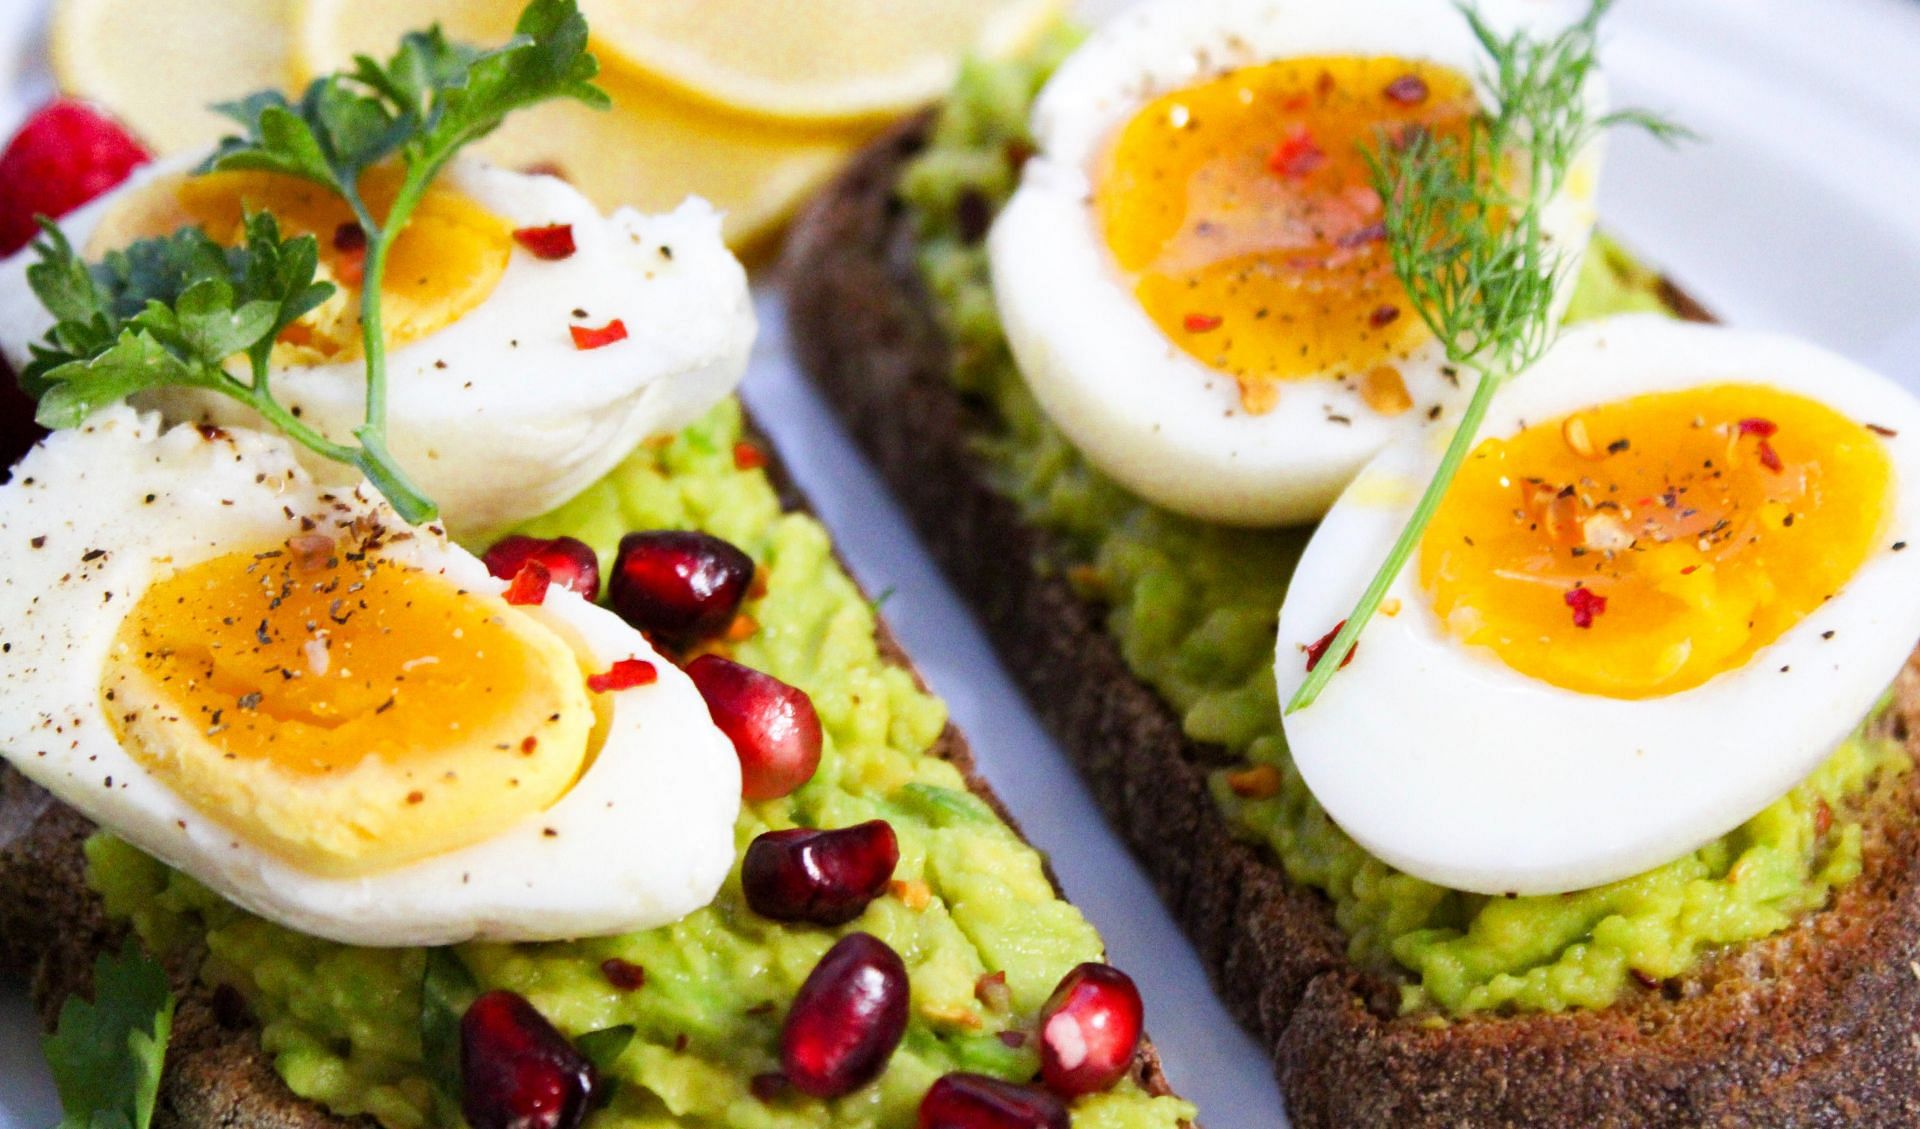 healthy foods to eat everyday (image sourced via Pexels / Photo by jane doan)